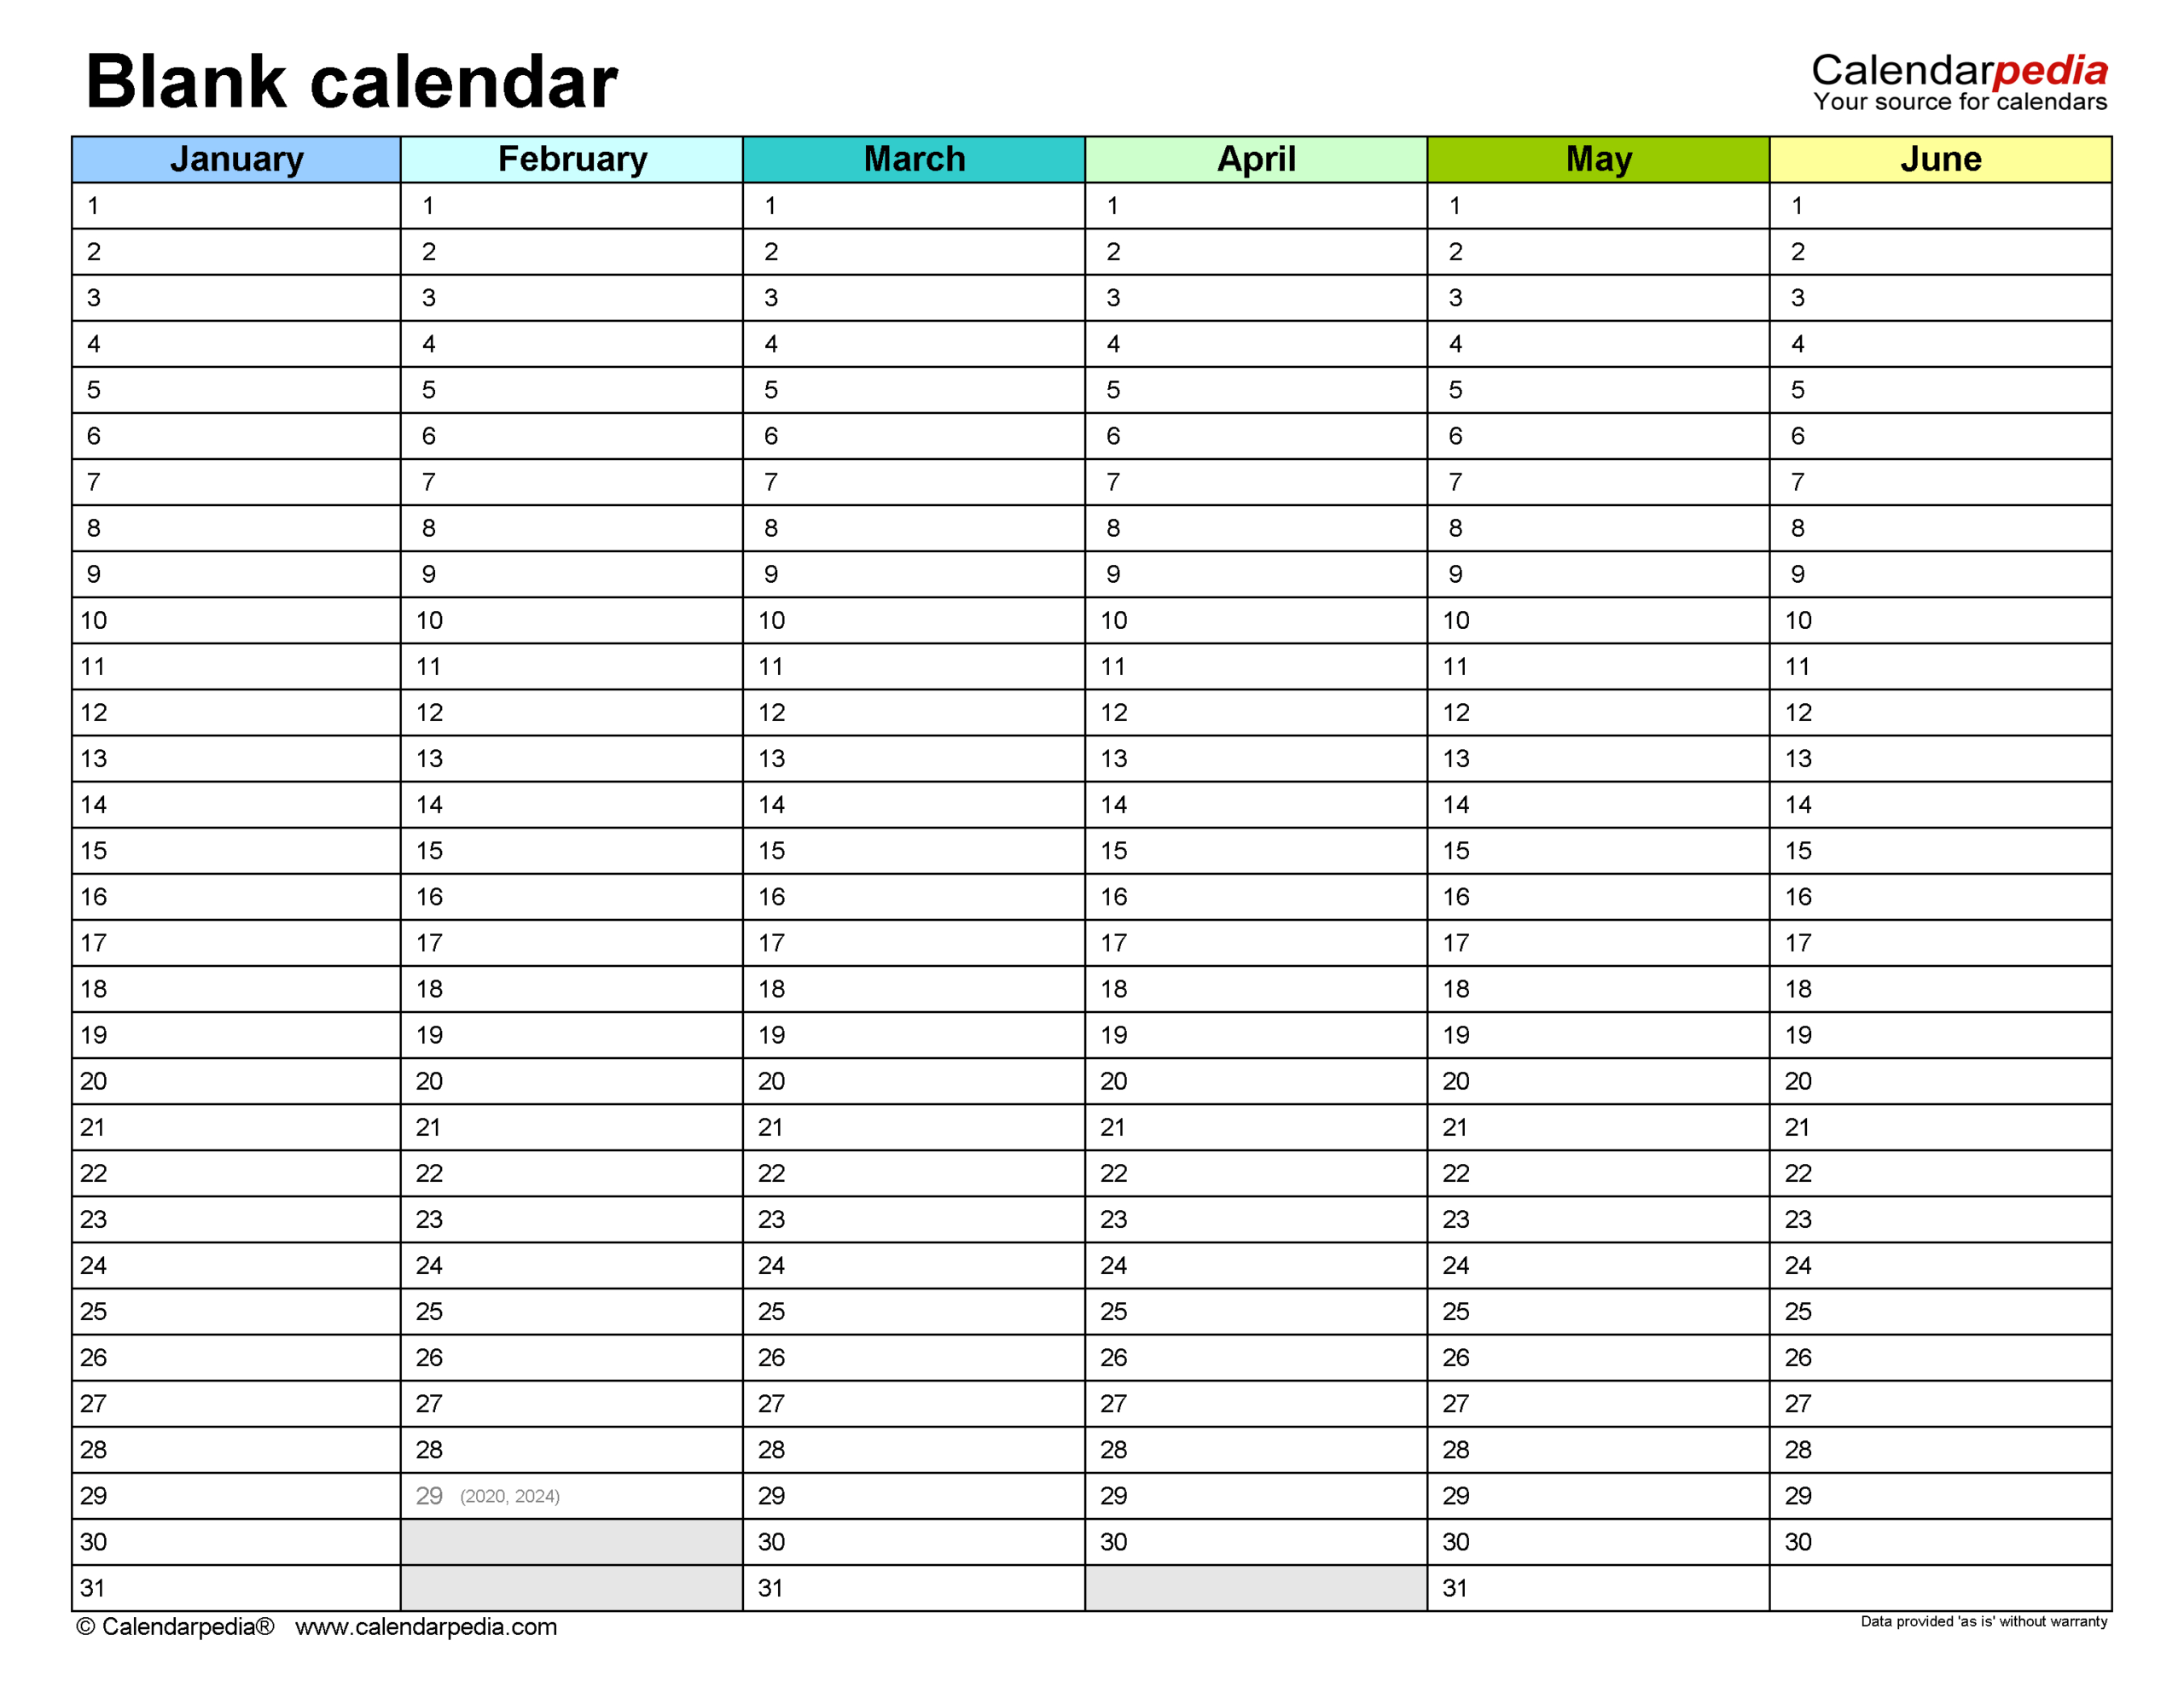 Blank Calendars – Free Printable Microsoft Word Templates With Regard To Blank Calender Template